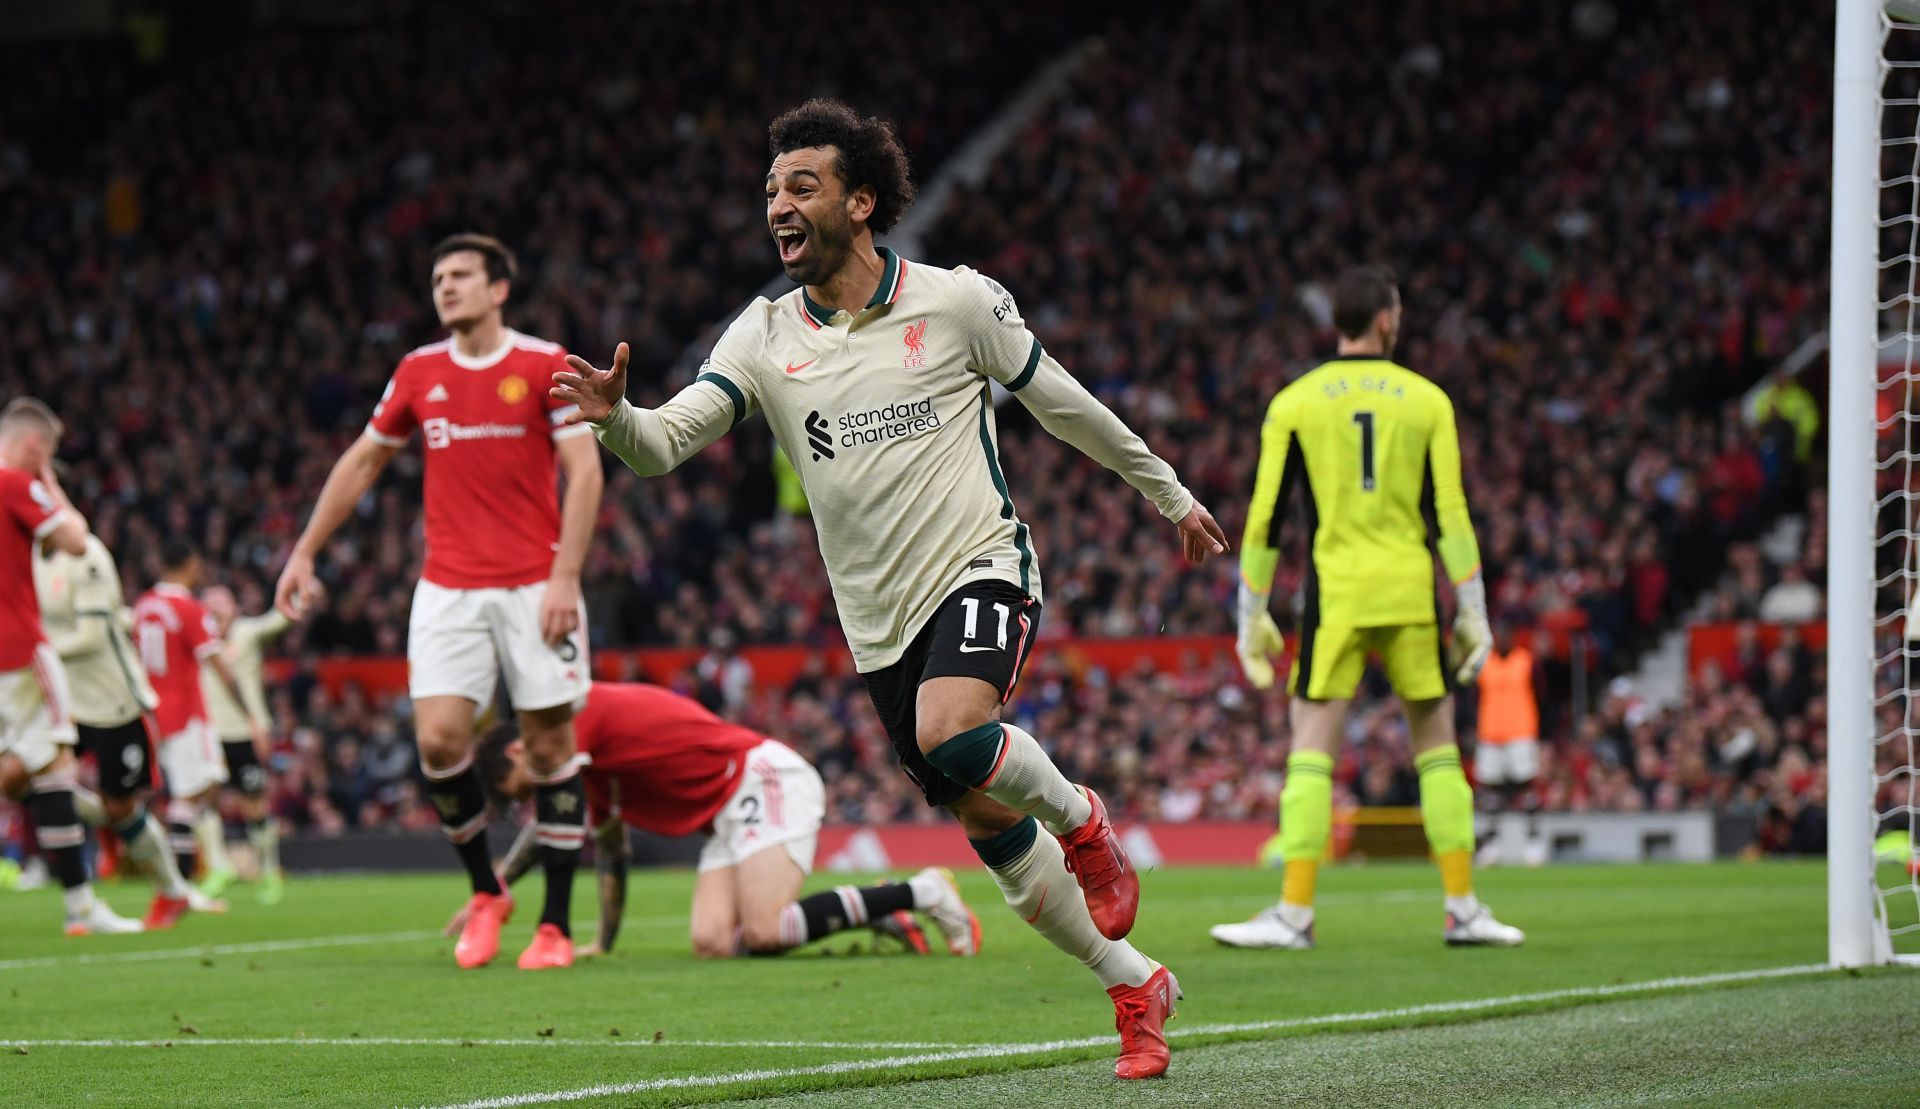 Mohamed Salah led Liverpool to a huge win against Manchester United in the Premier League on Sunday